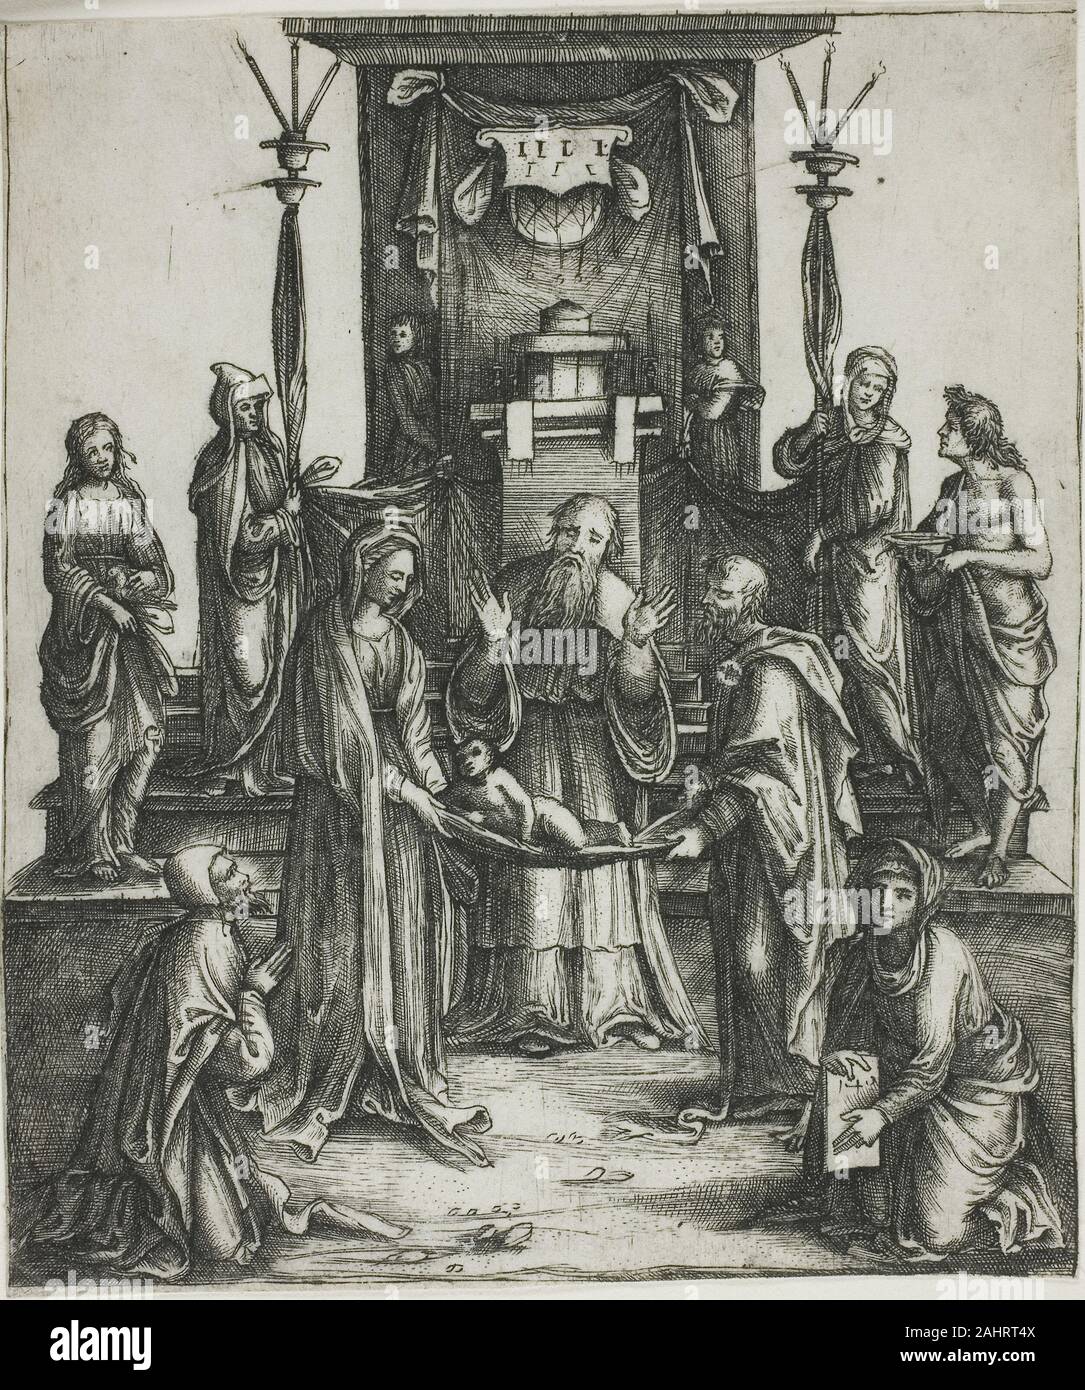 Lorenzo di Ottavio Costa. Presentation of Christ. 1497–1507. Italy. Engraving in black on ivory laid paper Born in Ferrara, Costa studied there with Cosimo Tura before moving to Bologna in the early 1480s. He traveled throughout Italy, ultimately settling in Mantua as court artist to the powerful Gonzaga family. This rich engraving of the biblical account of Christ’s introduction to the teachers at the temple in Jerusalem is after a 1502 painting by Costa for the church of Santa Maria della Vita in Bologna. It is unclear whether this work was engraved by the artist himself or was copied by an Stock Photo